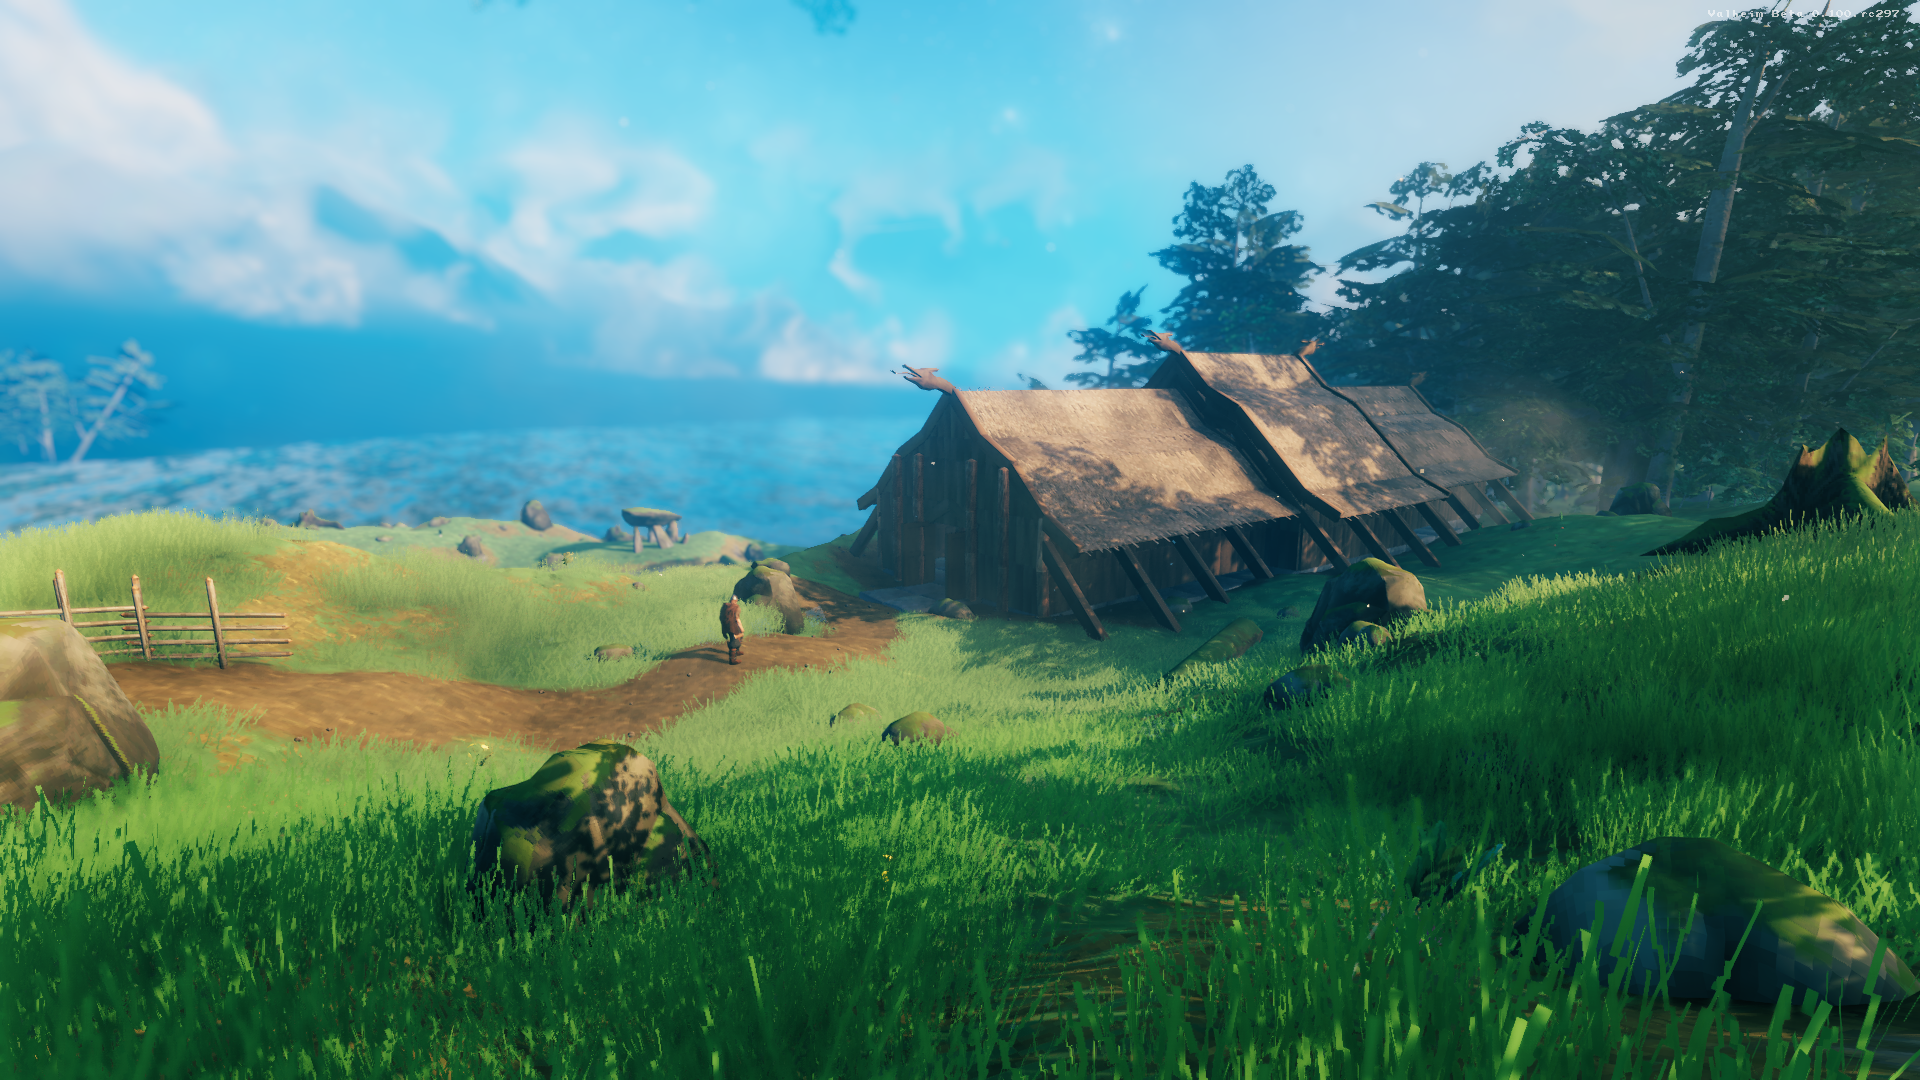 Build your own longhouse in Iron Gate’s Valheim -- a task a recent Valheim update made easier